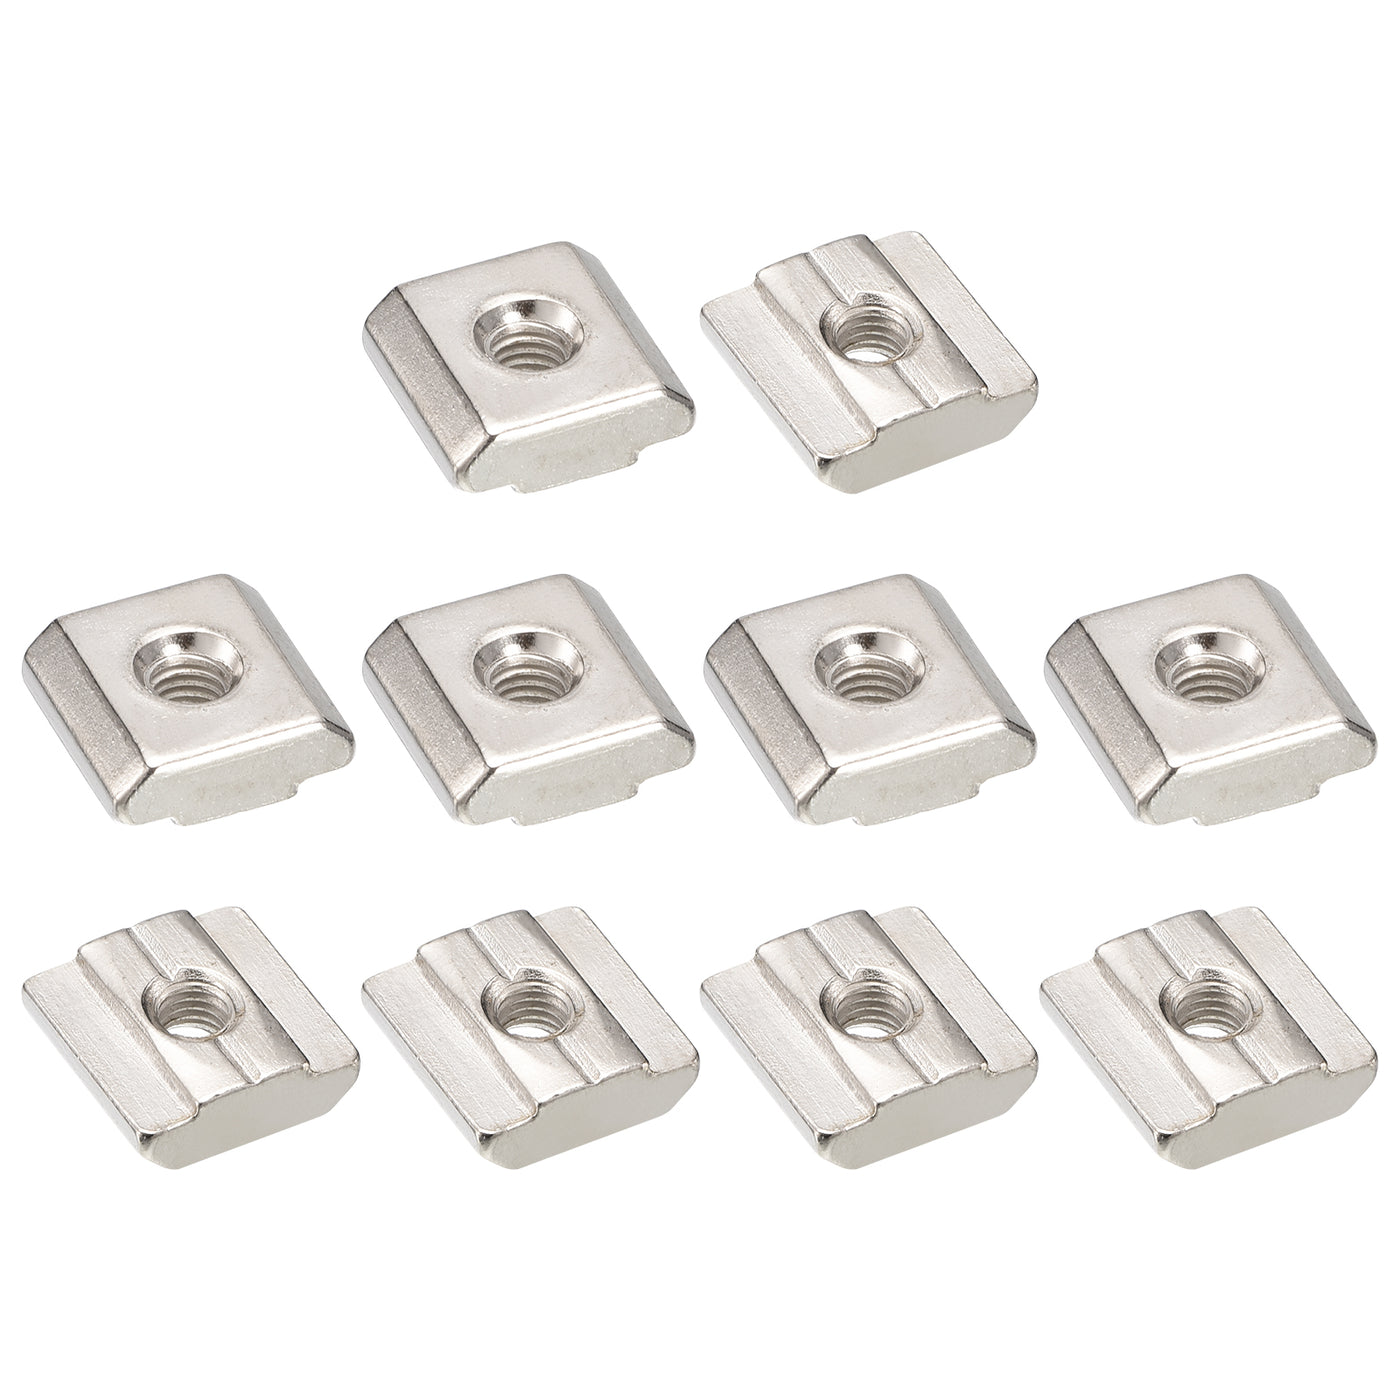 uxcell Uxcell T Nuts, 30pcs - Nickel Plated Carbon Steel T Slot Bolts, 3030 Series M5 Hammer Head Fastener, Sliding T Nuts for Aluminum Extrusion Profile (Silver)